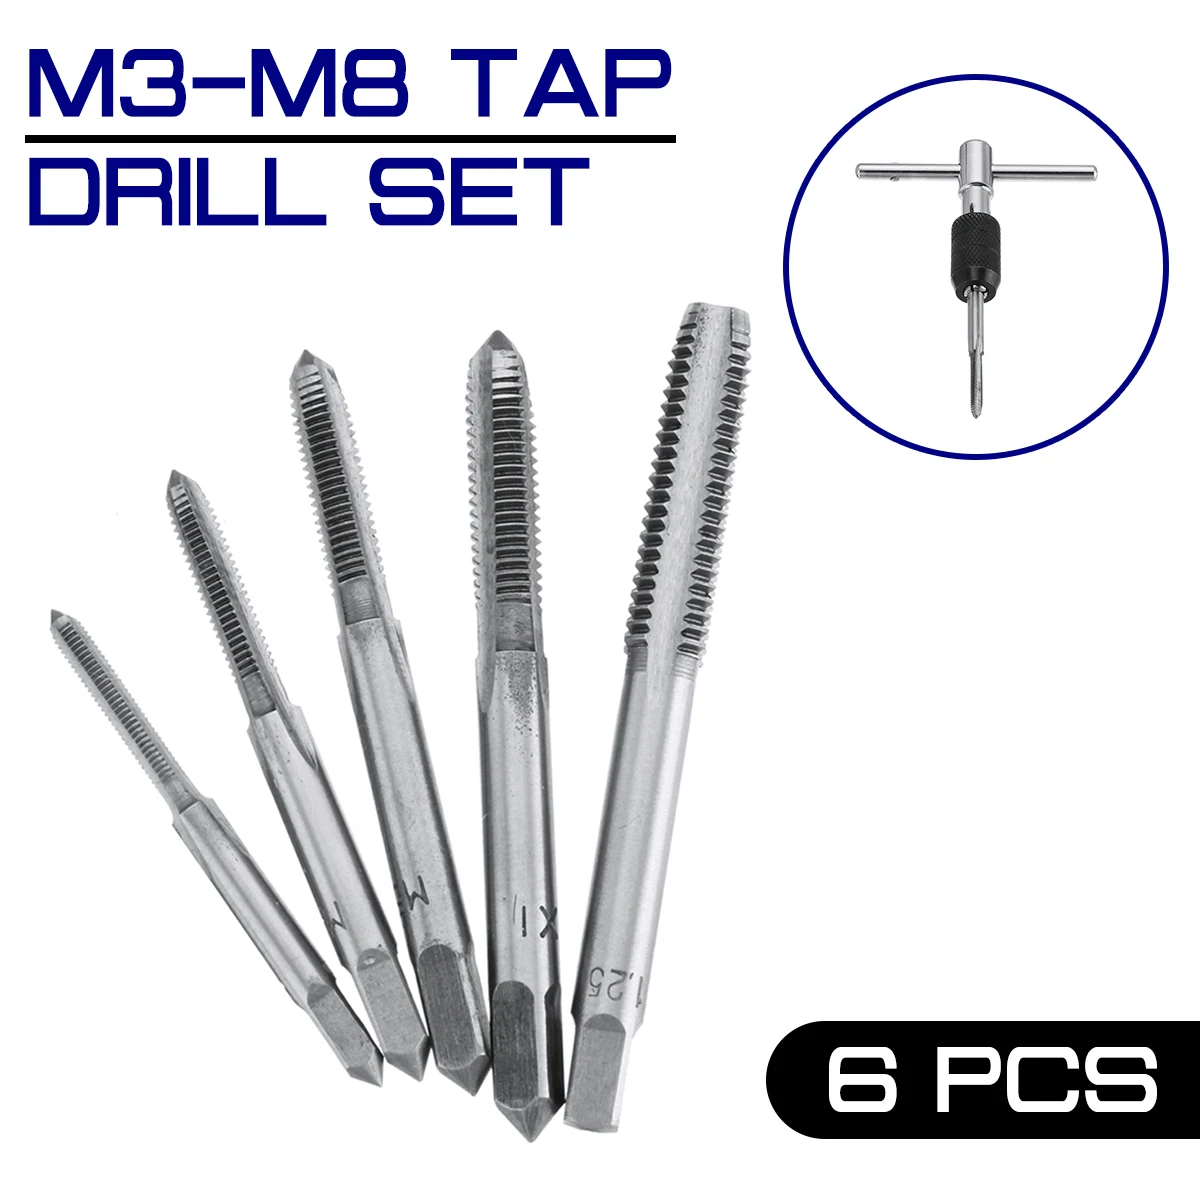 

M3-M8 6Pcs Tap Drill Set T Handle Ratchet Tap Wrench Machinist Tool With Alloy Steel Screw Tap Hand